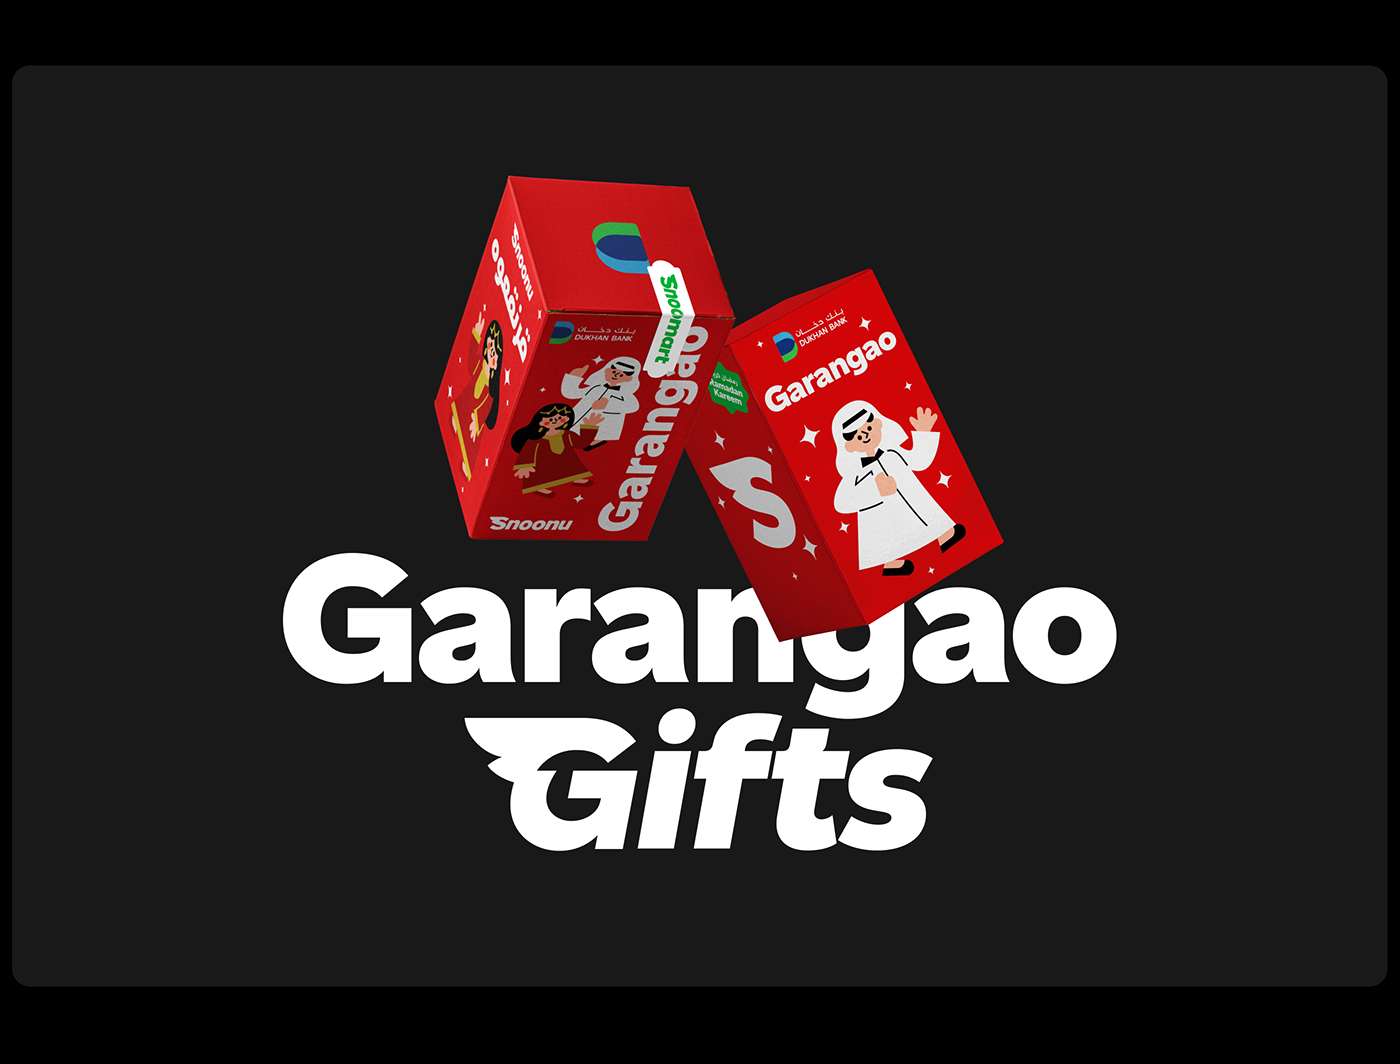 Characters for gift box for garangao holiday